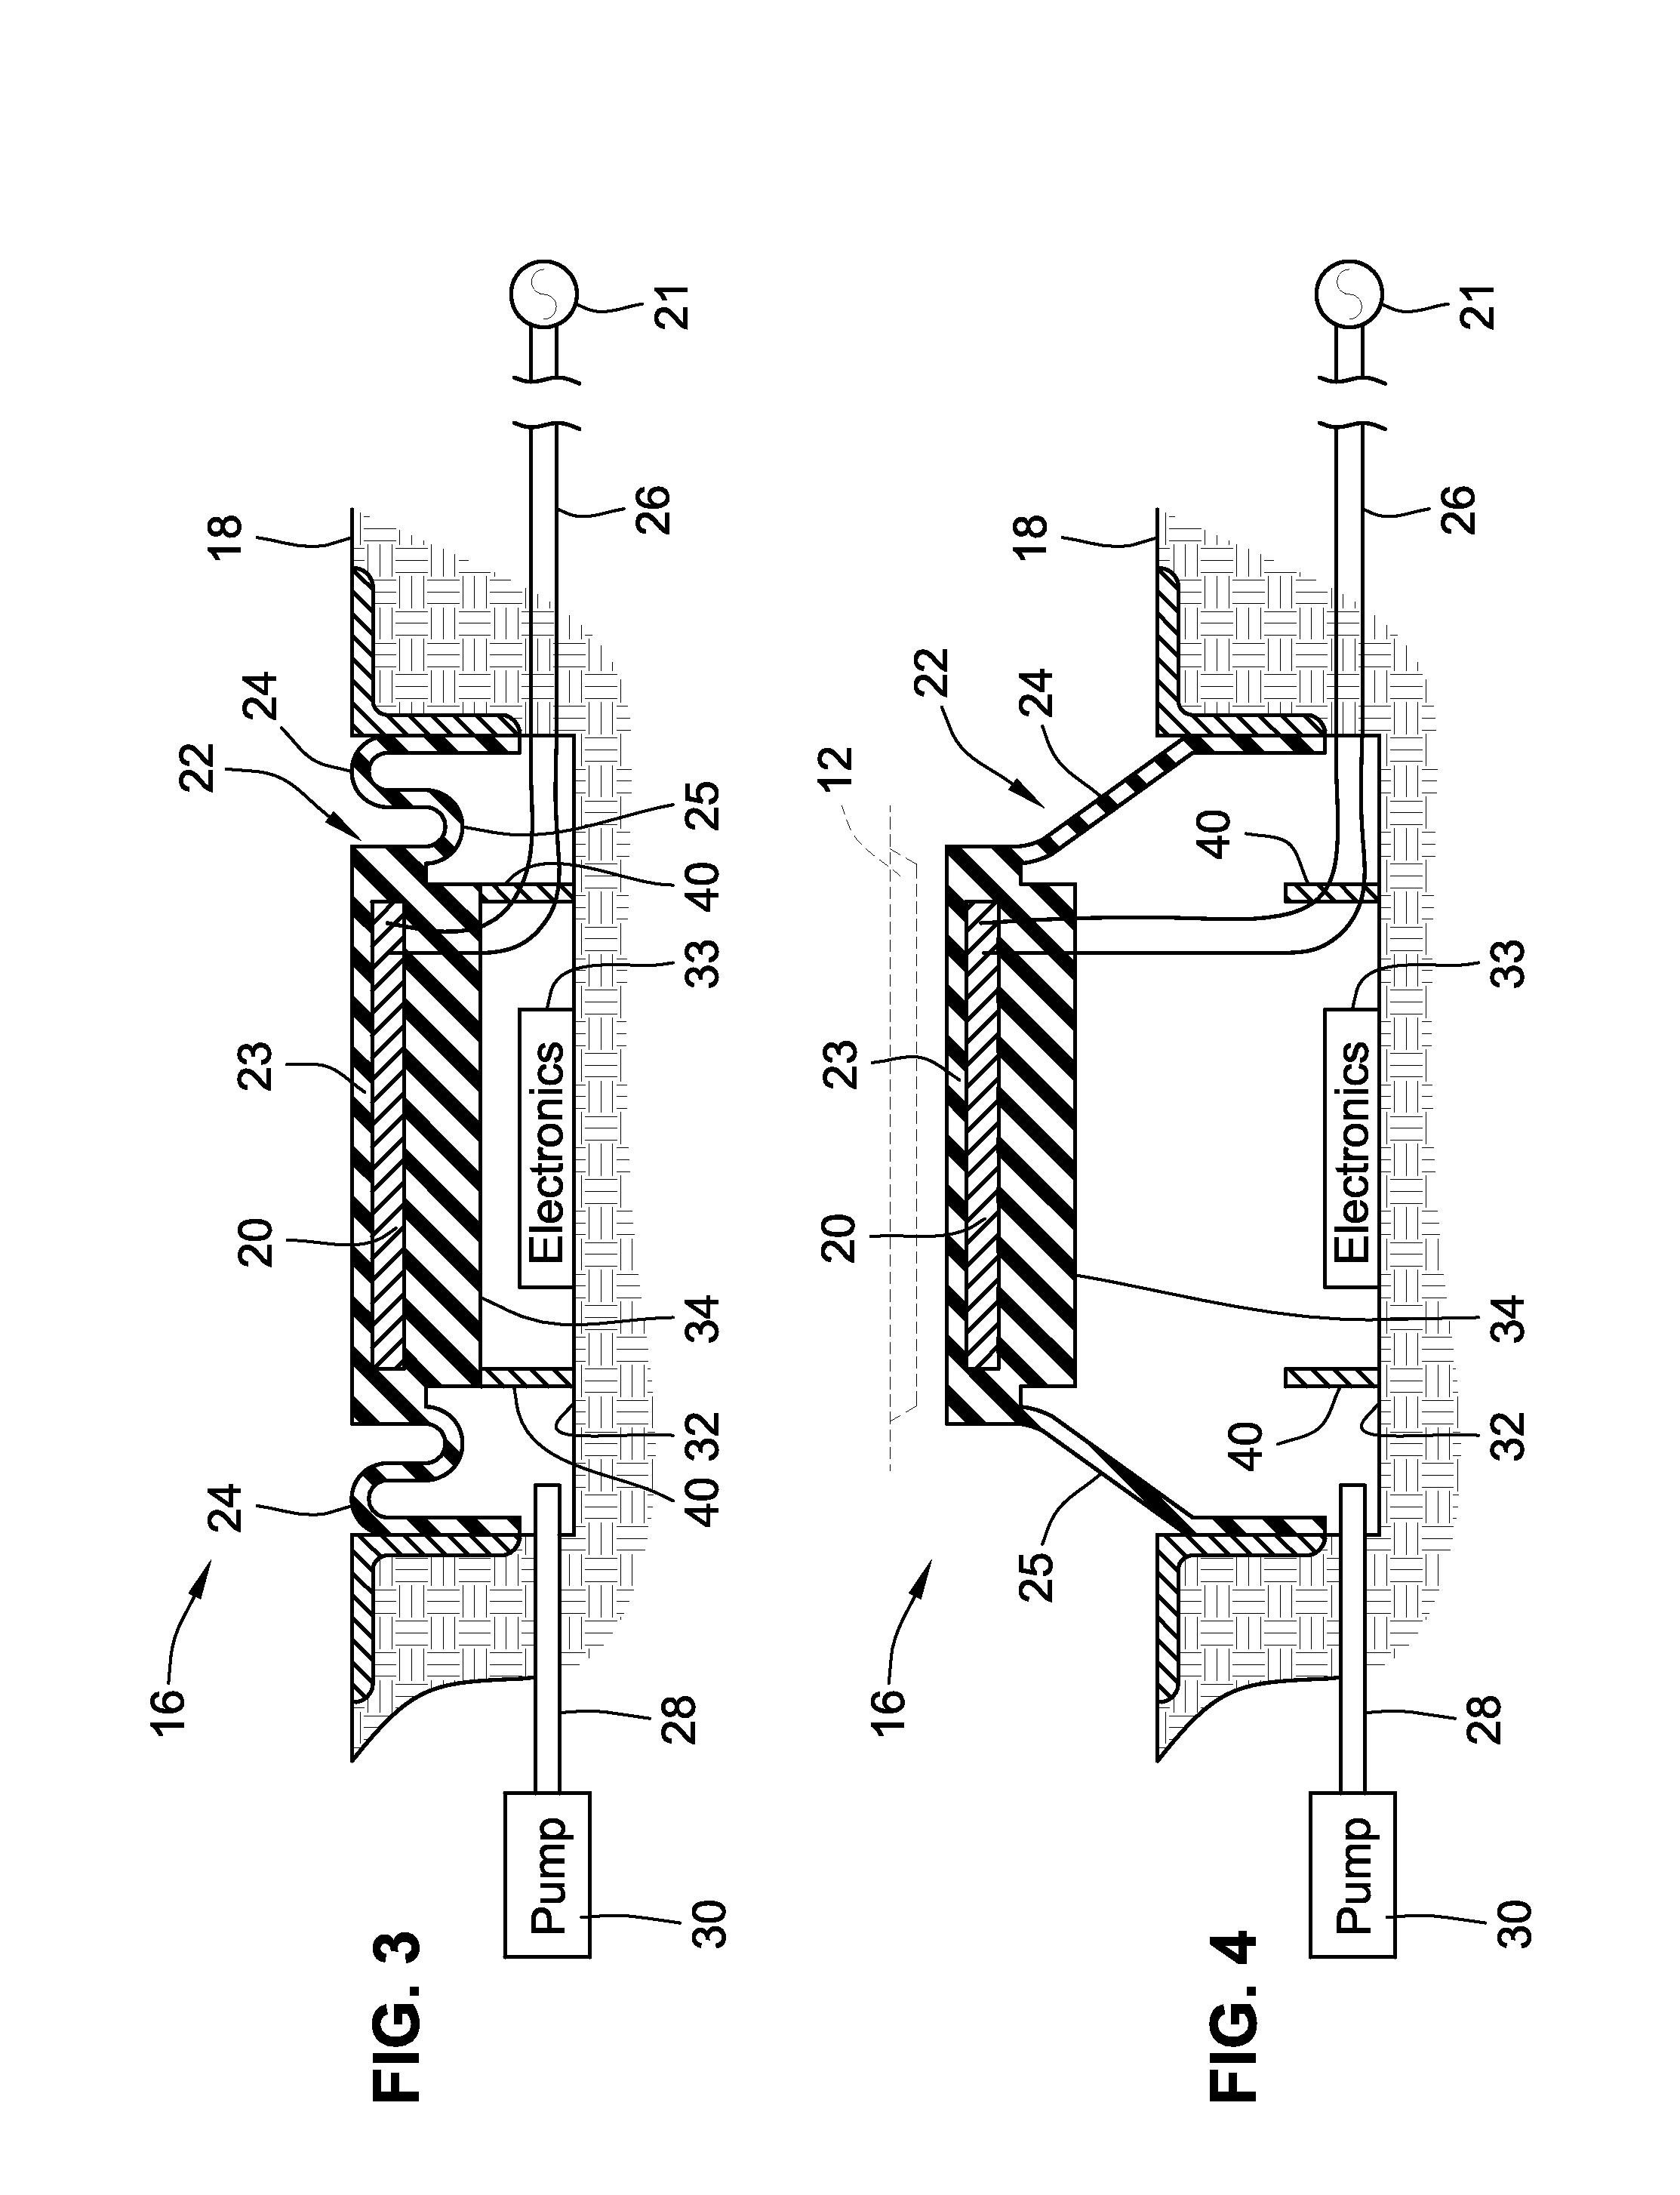 Extendable and deformable charging system